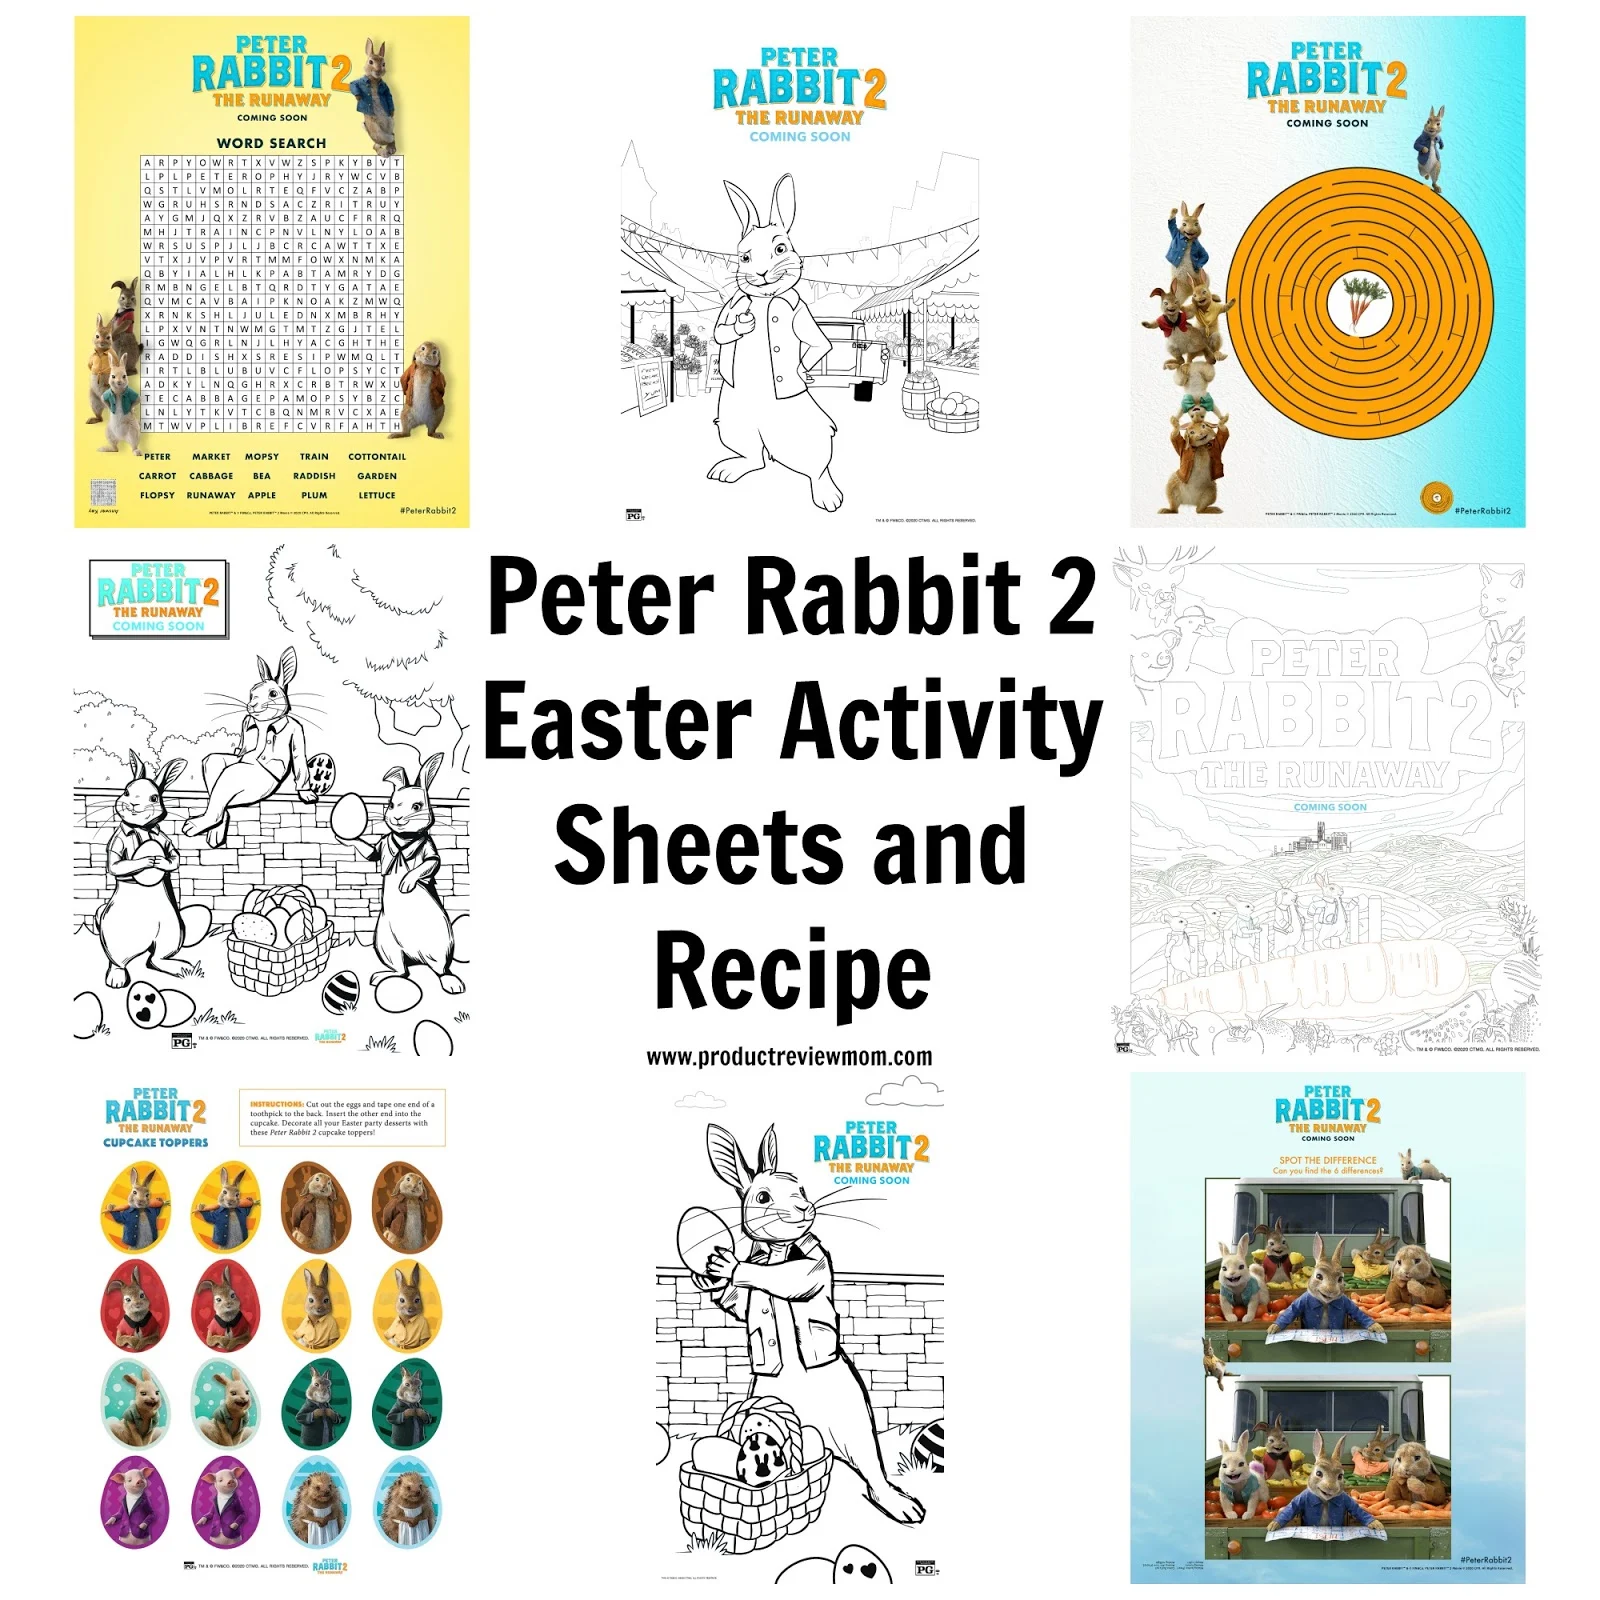 Peter Rabbit 2 Easter Activity Sheets and Recipe